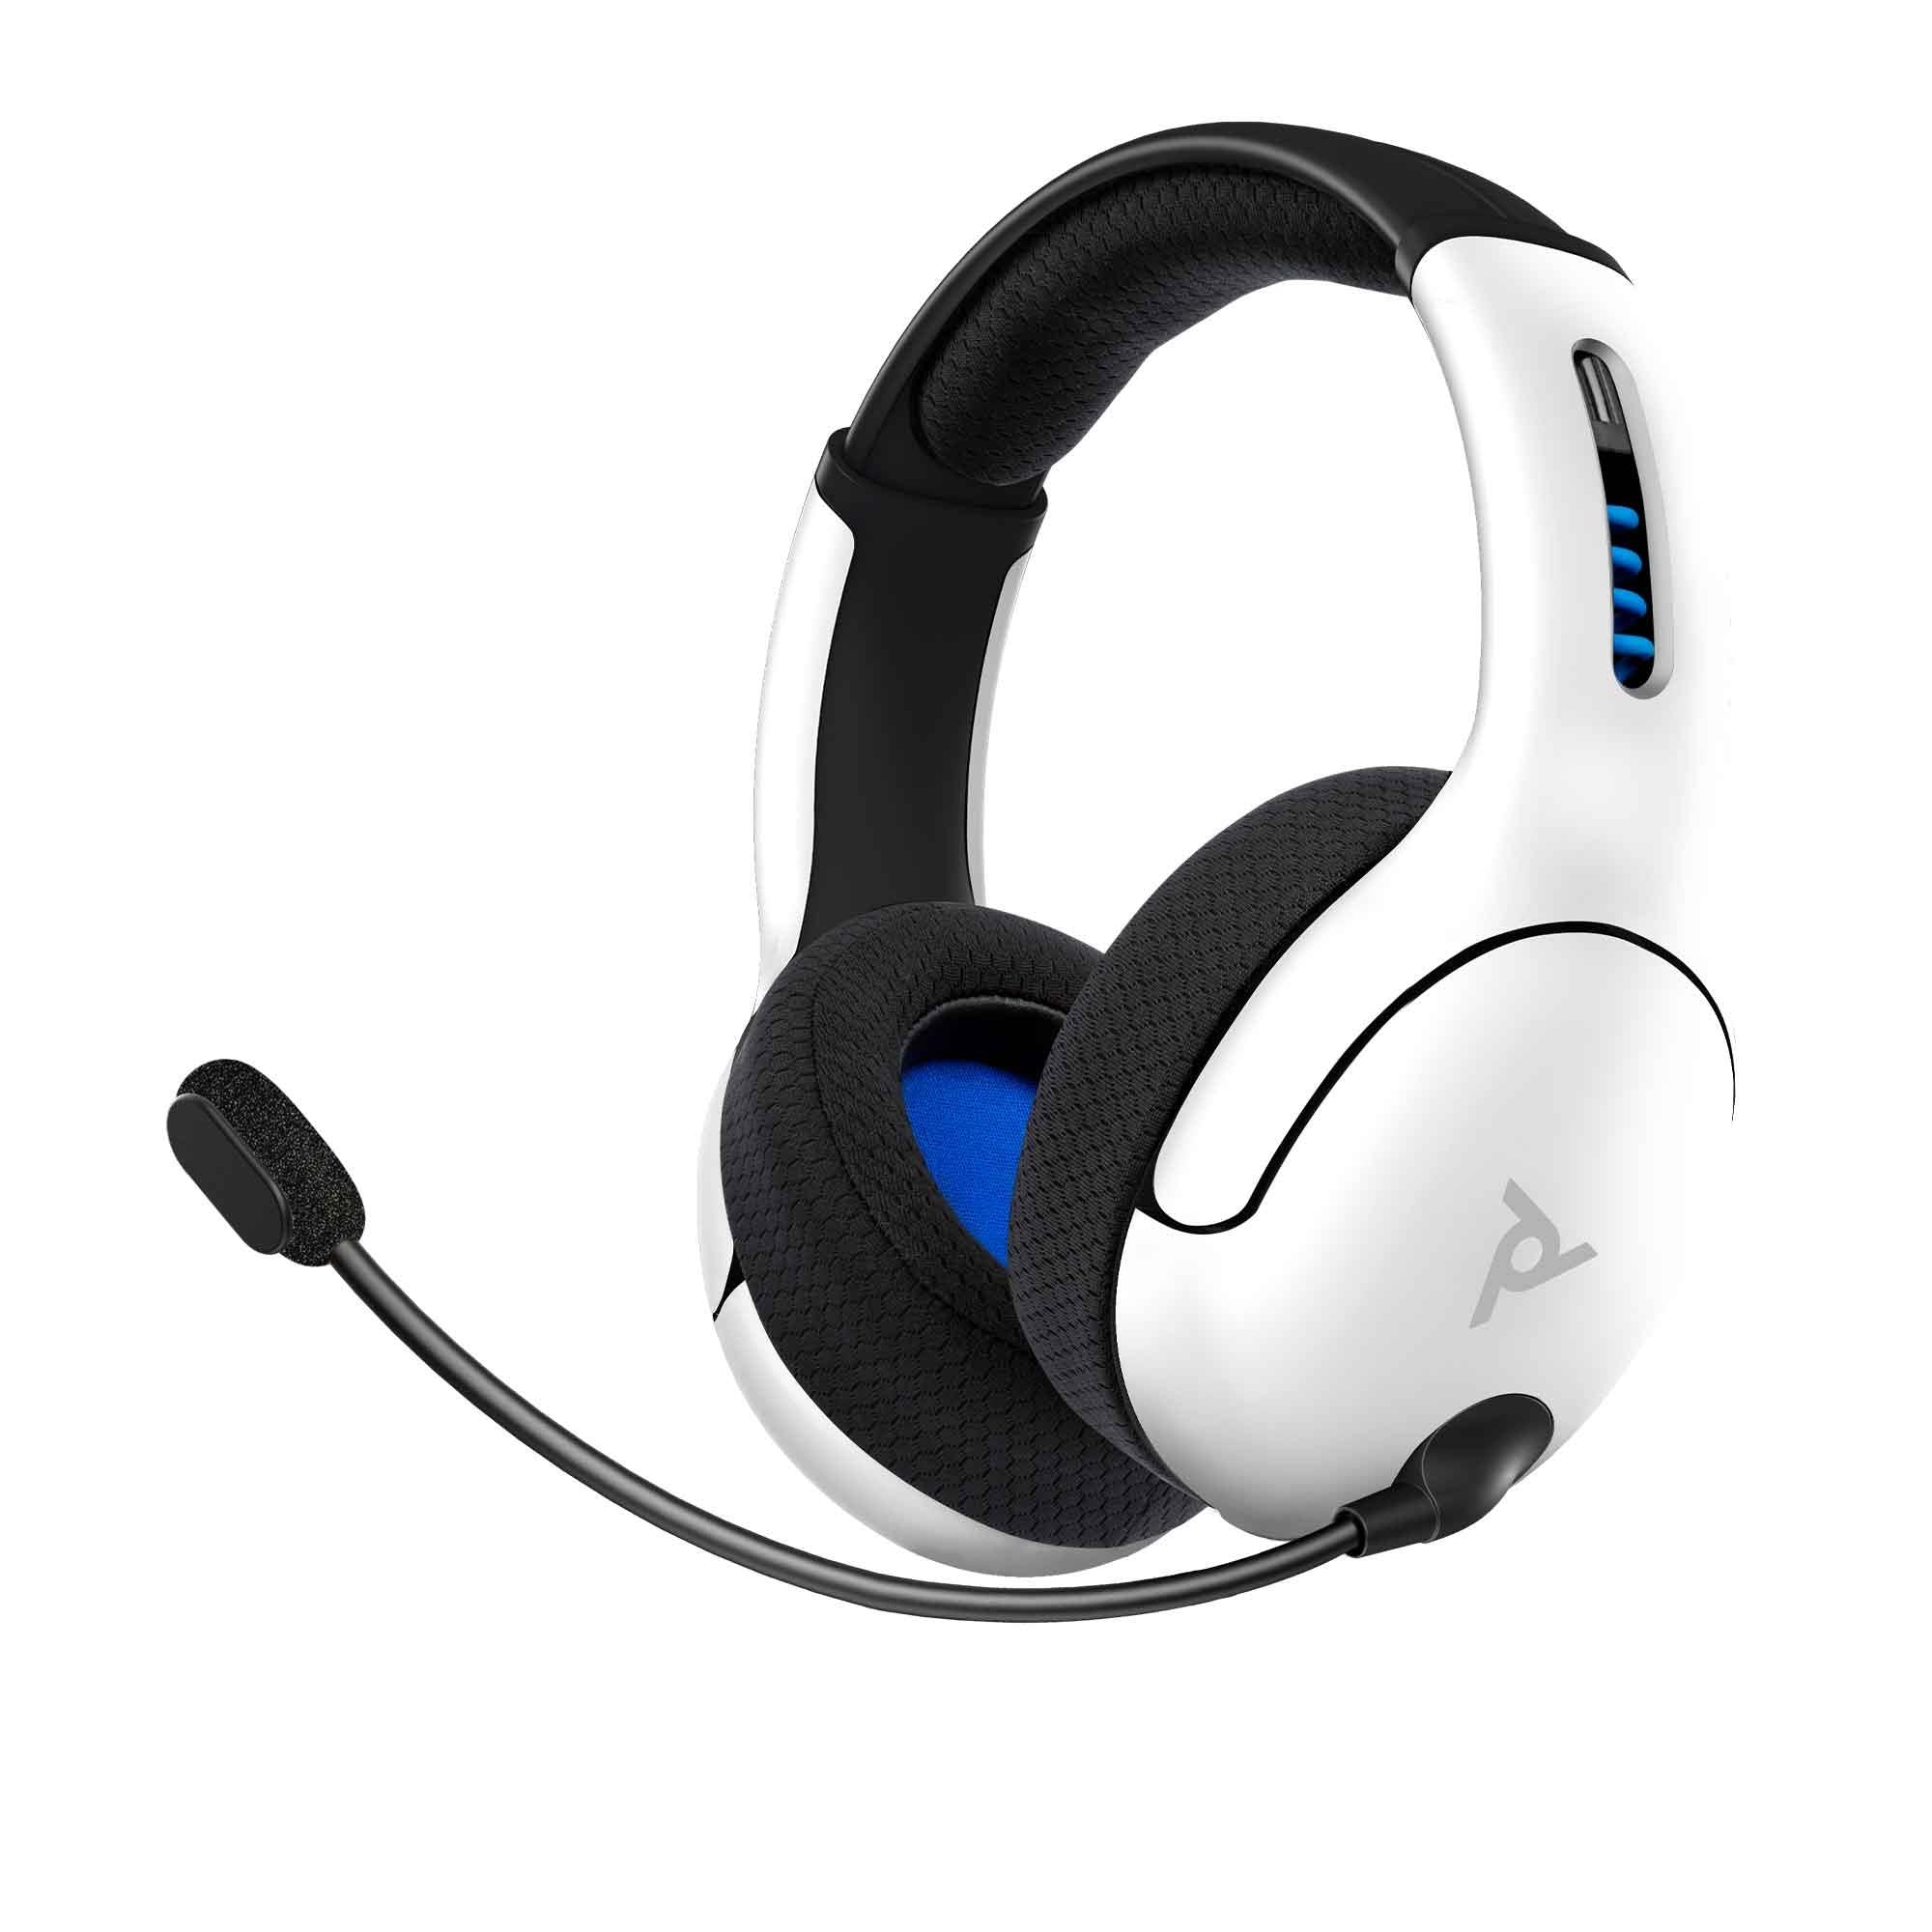 lvl 50 wireless gaming headset for playstation (white)